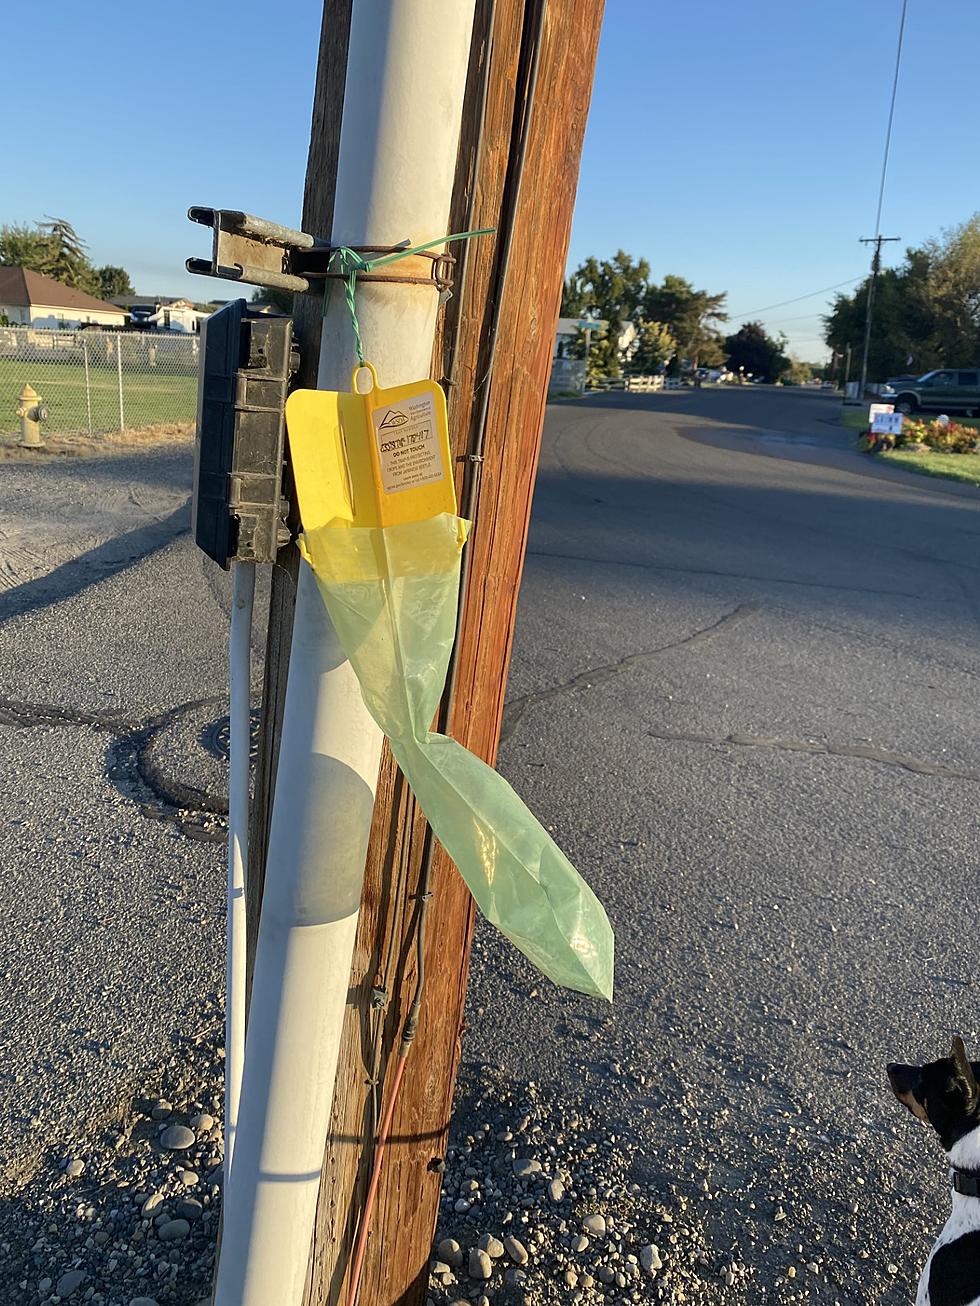 DON'T TOUCH These Green Bags on Utility Poles in Tri-Cities